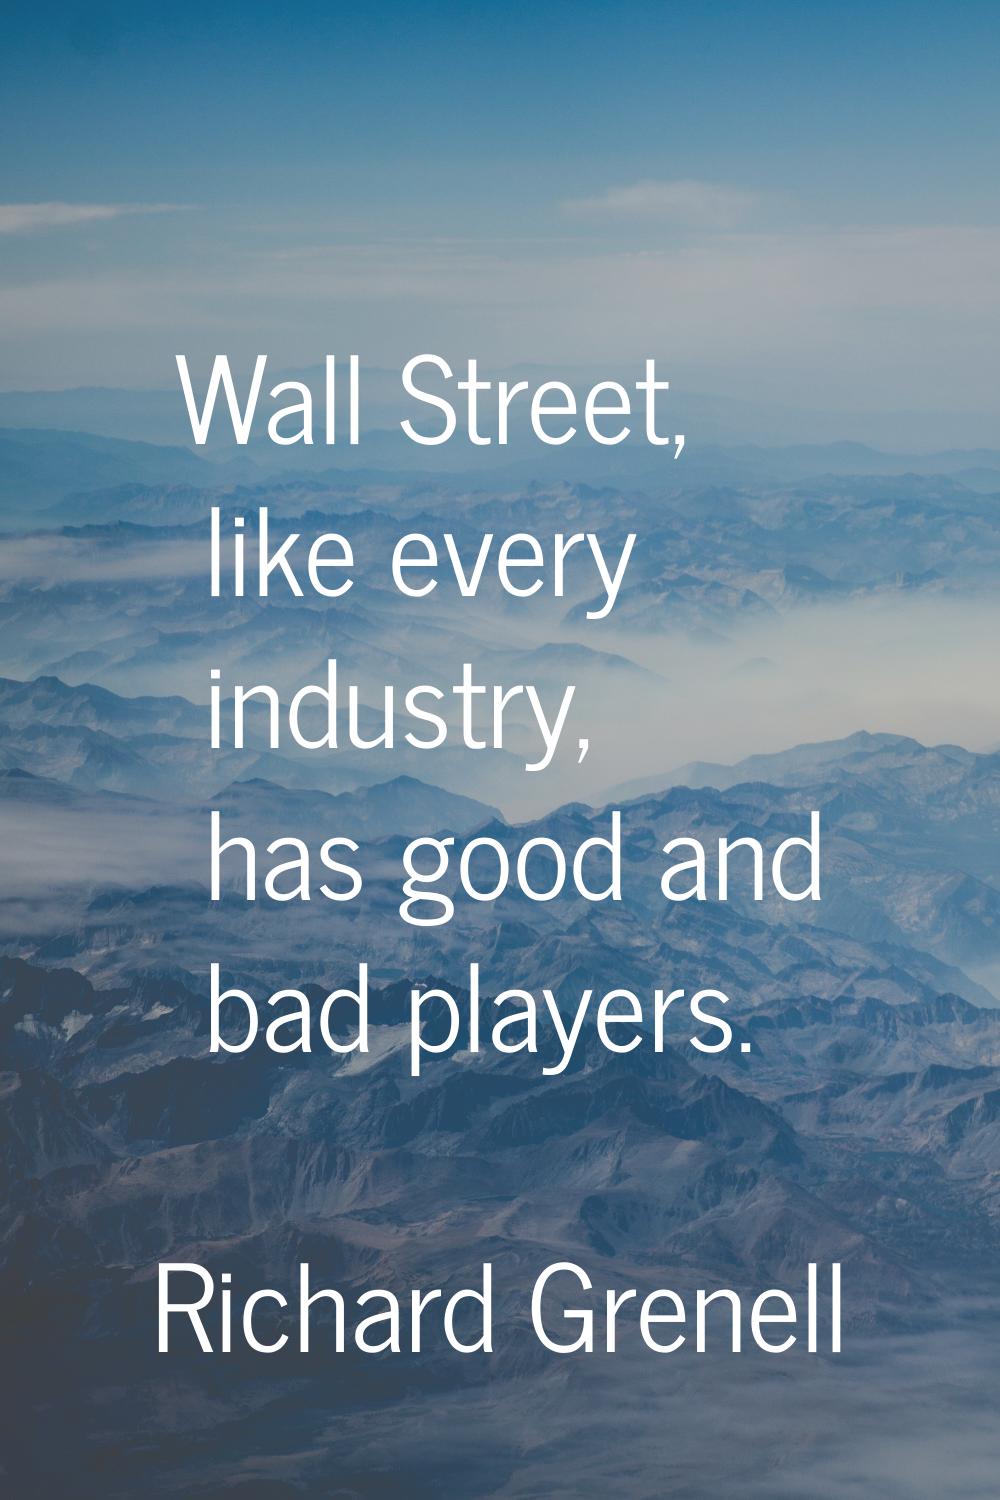 Wall Street, like every industry, has good and bad players.